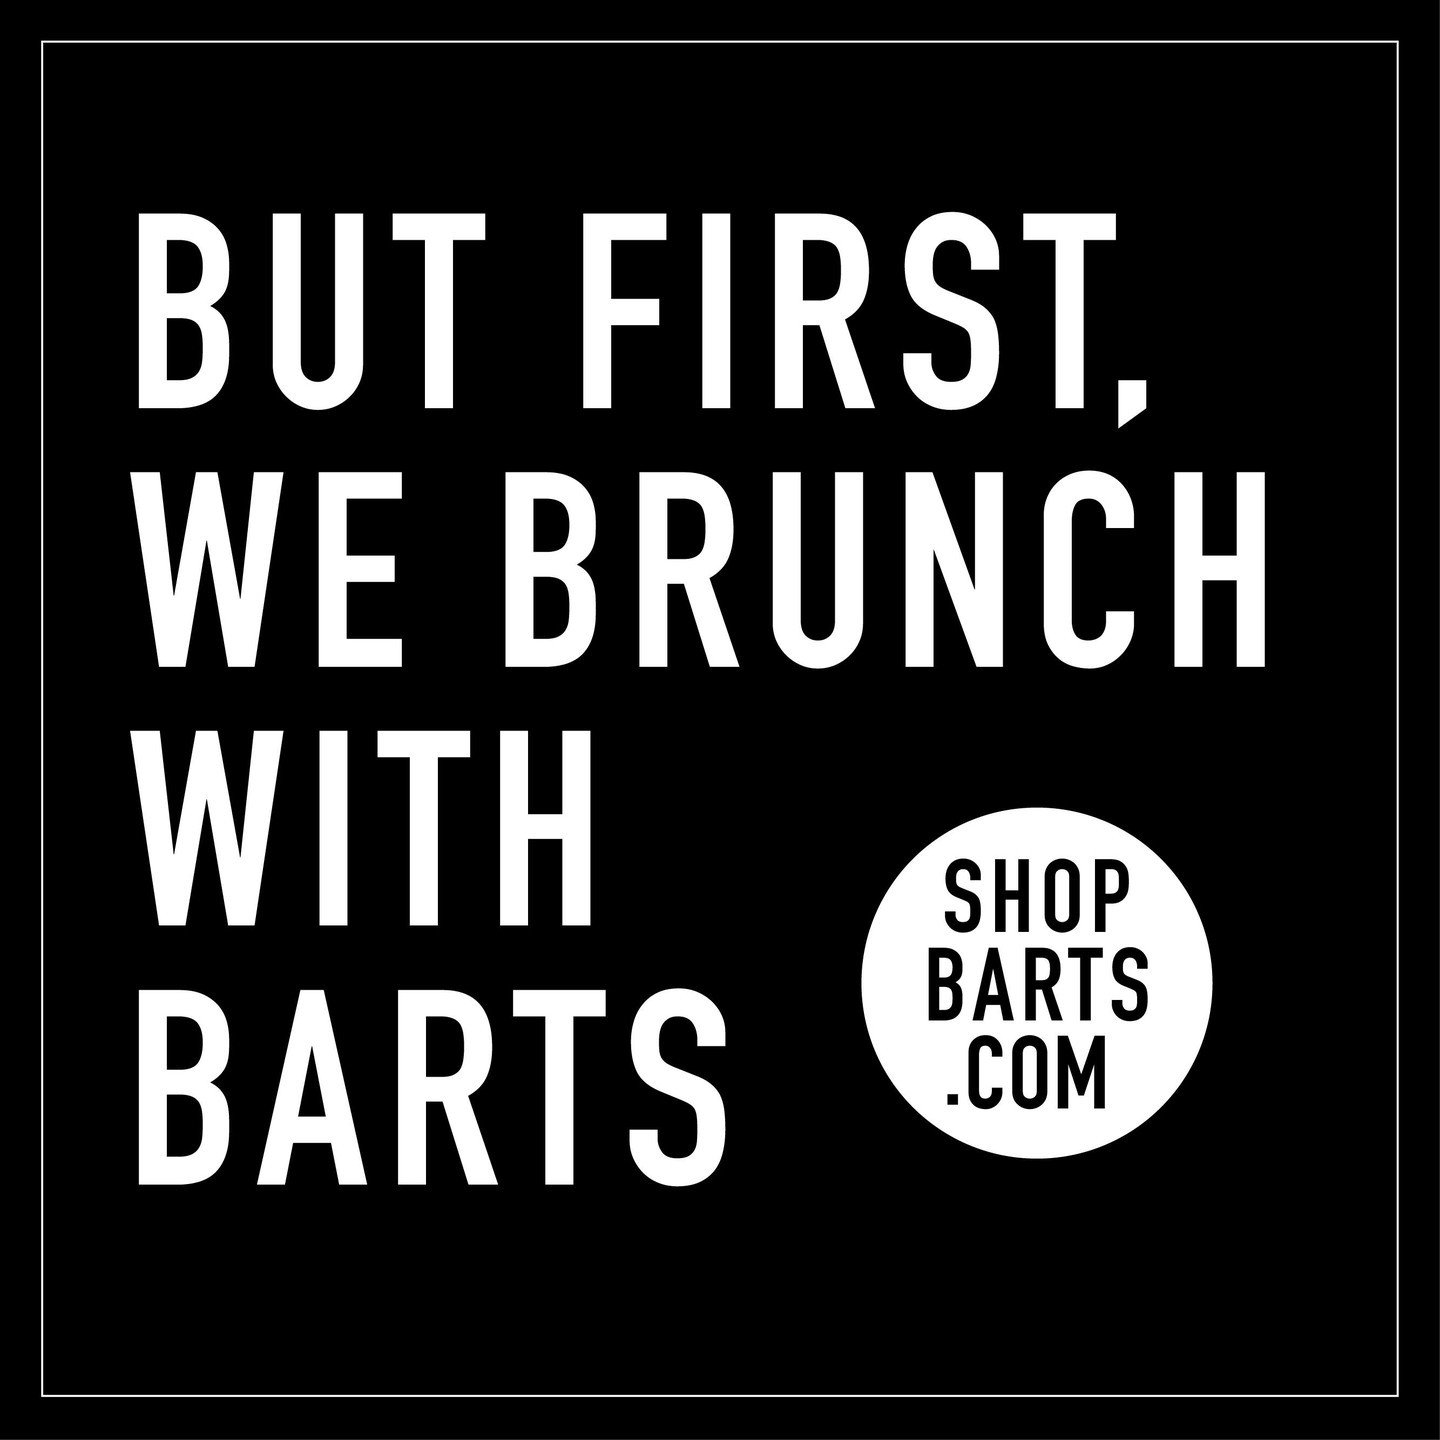 Happy Sunday, y'all! Hope you are brunching it up somewhere good with a Barts Bloody Mary! Cheers! #bartsbloodymary #betterbebarts #brunch #vodka #drinksthatrock #drinkporn #alcohol #drinkresponsibly #hairofthedog #bloodymary #bloodymaria #bloodies #